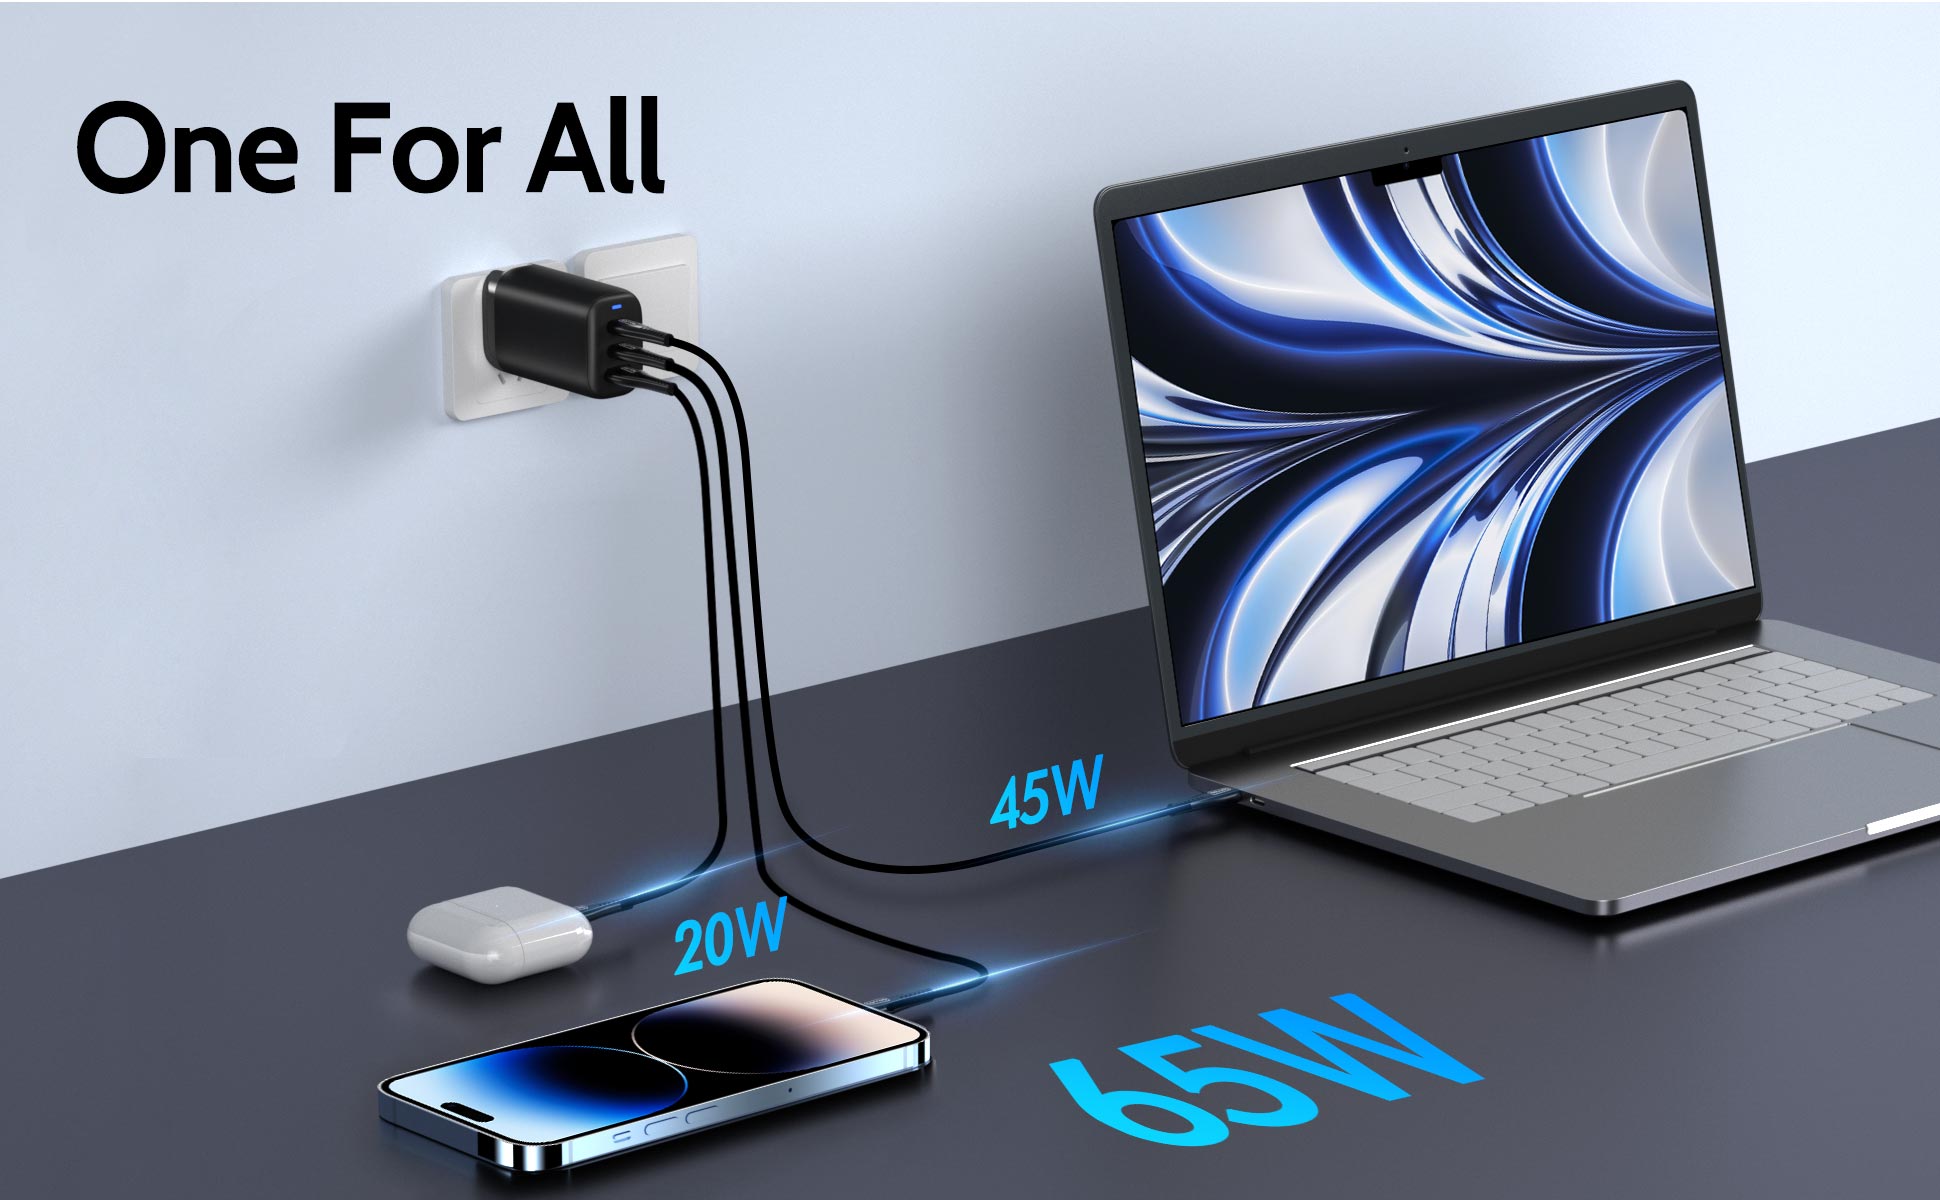 65WGaNcharger-has-three-ports-2-USBC-and-1-USBA-which-supports-charging-three-devices-at-the-same-time